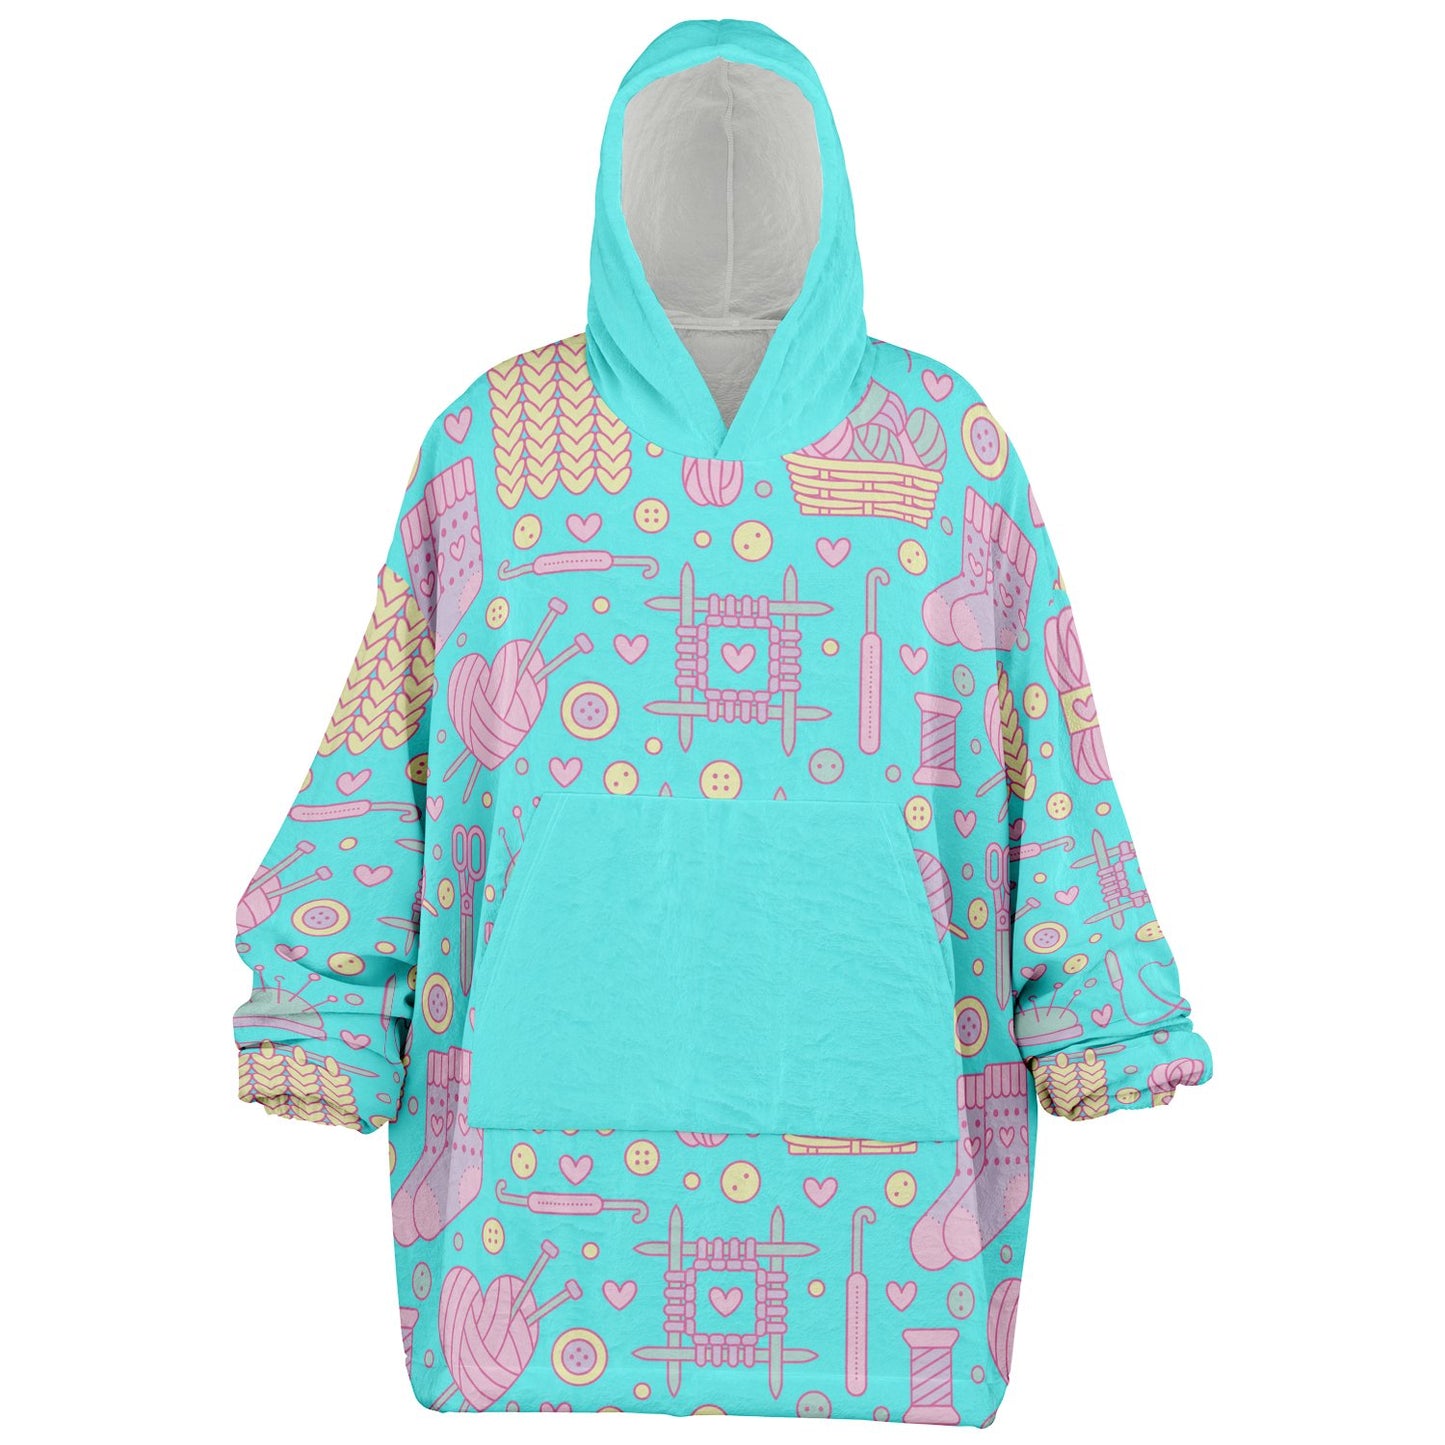 Crochet All Day Super Hoodie - Available for a Limited Time Only - chaosandthunder